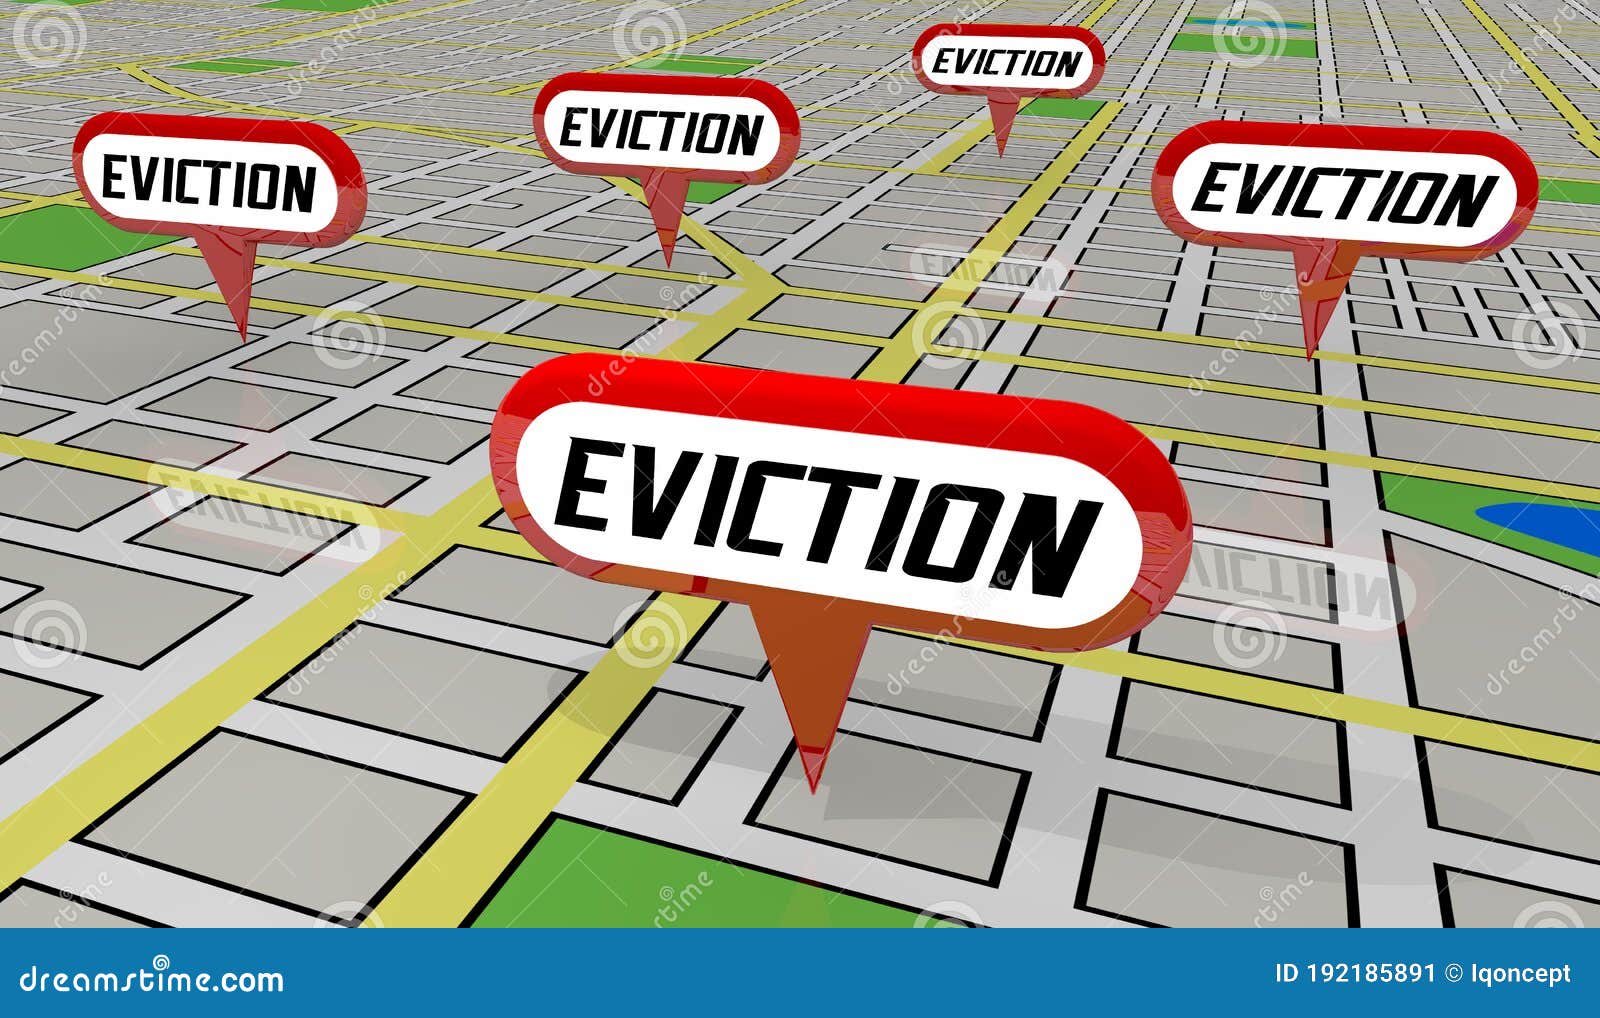 evictions tenants renters evicted removed from homes map pin locations 3d 